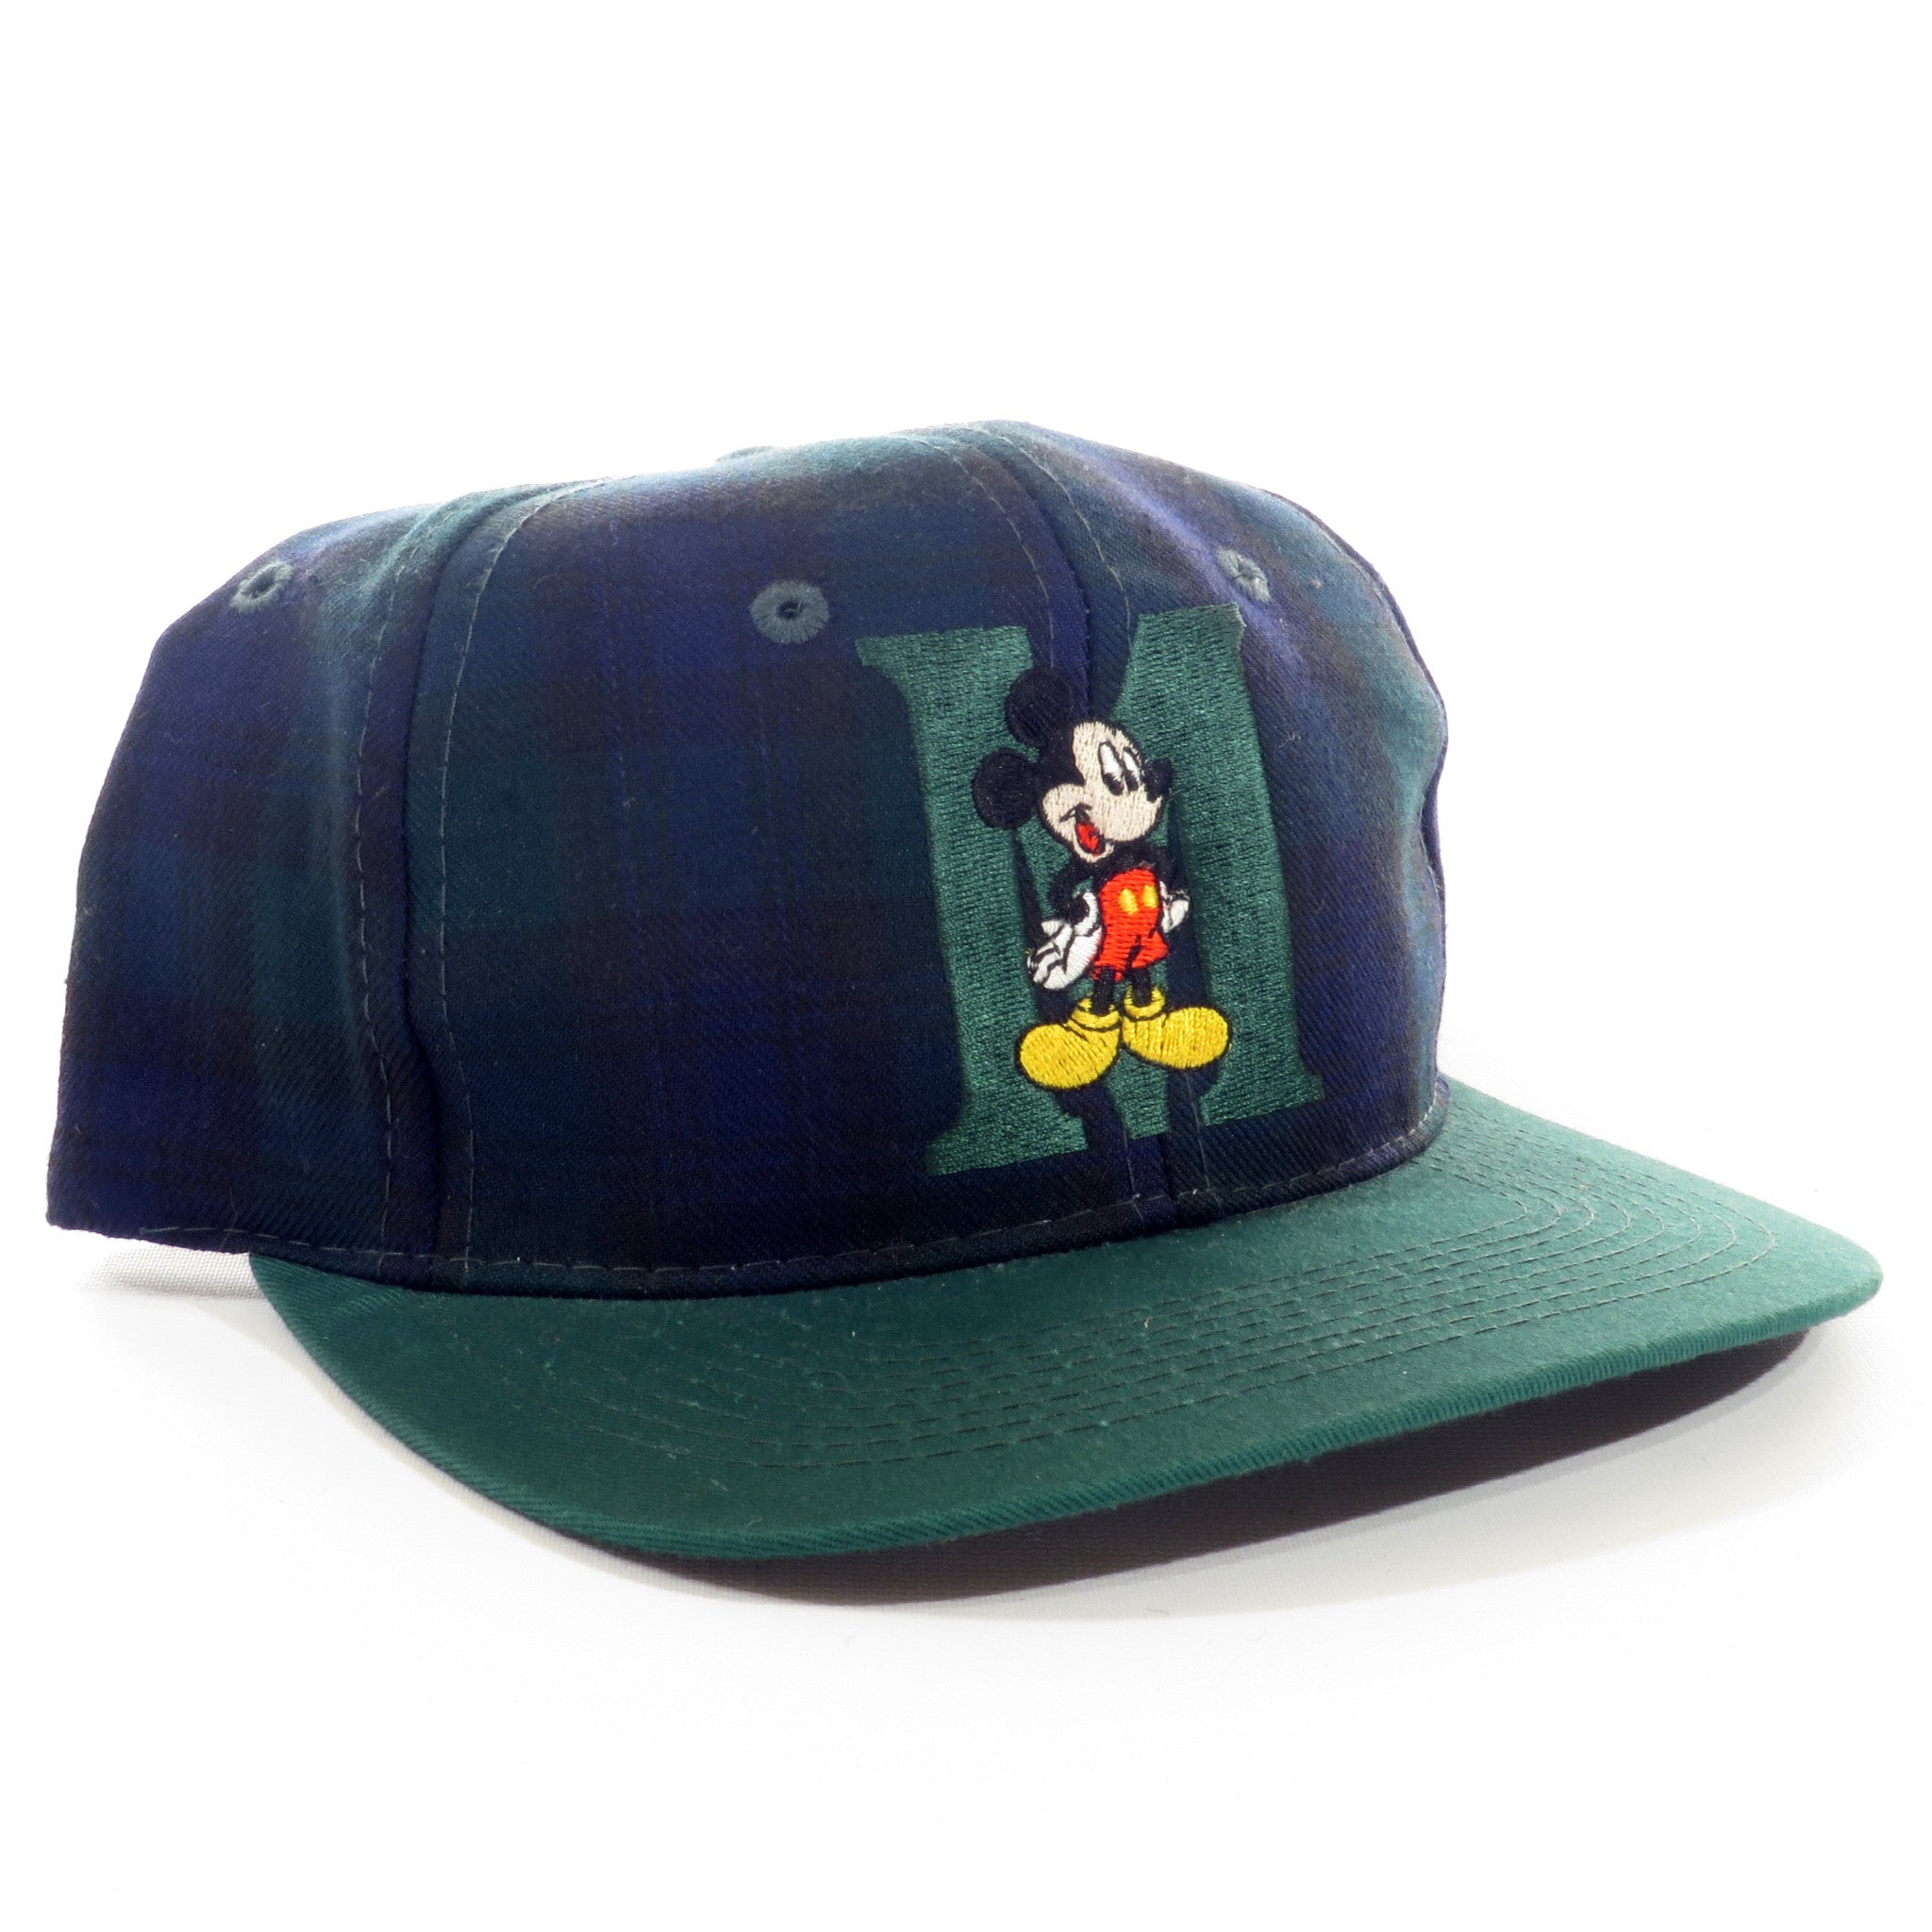 Mickey Mouse Plaid Green Snapback Hat